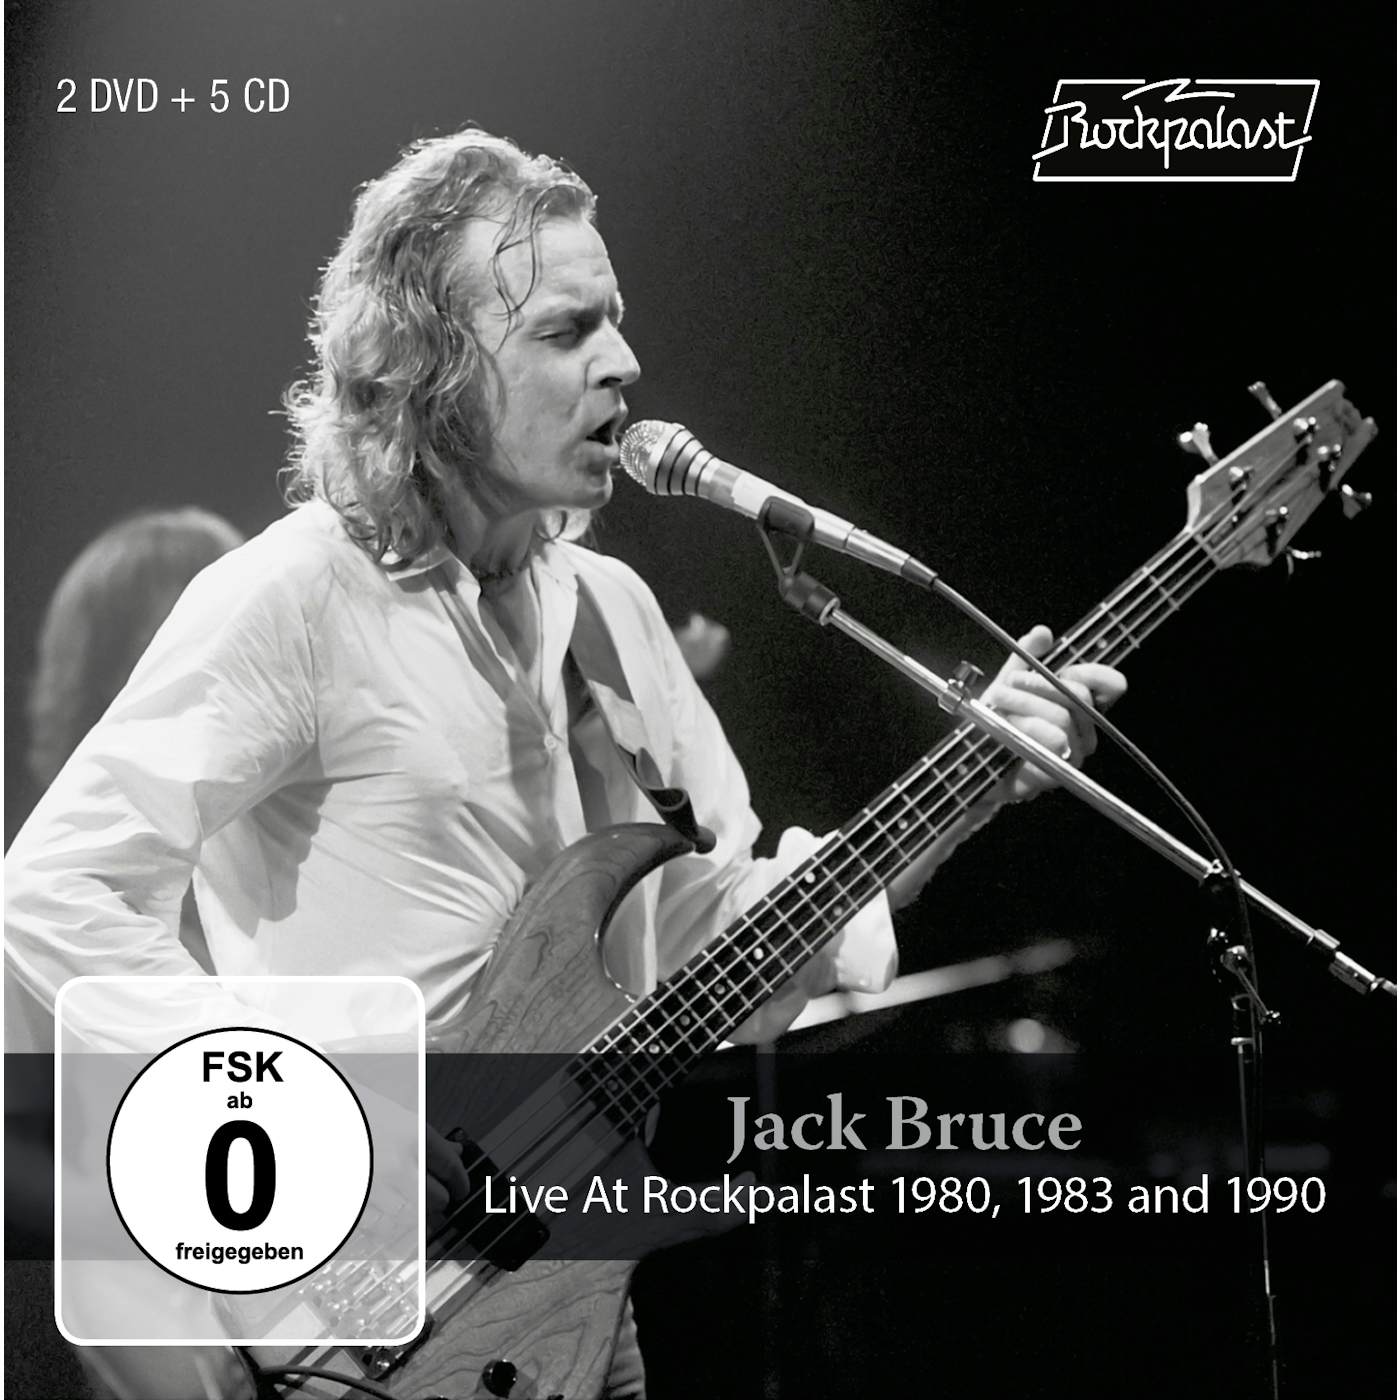 Jack Bruce LIVE AT ROCKPALAST 1980, 1983 AND 1990 CD